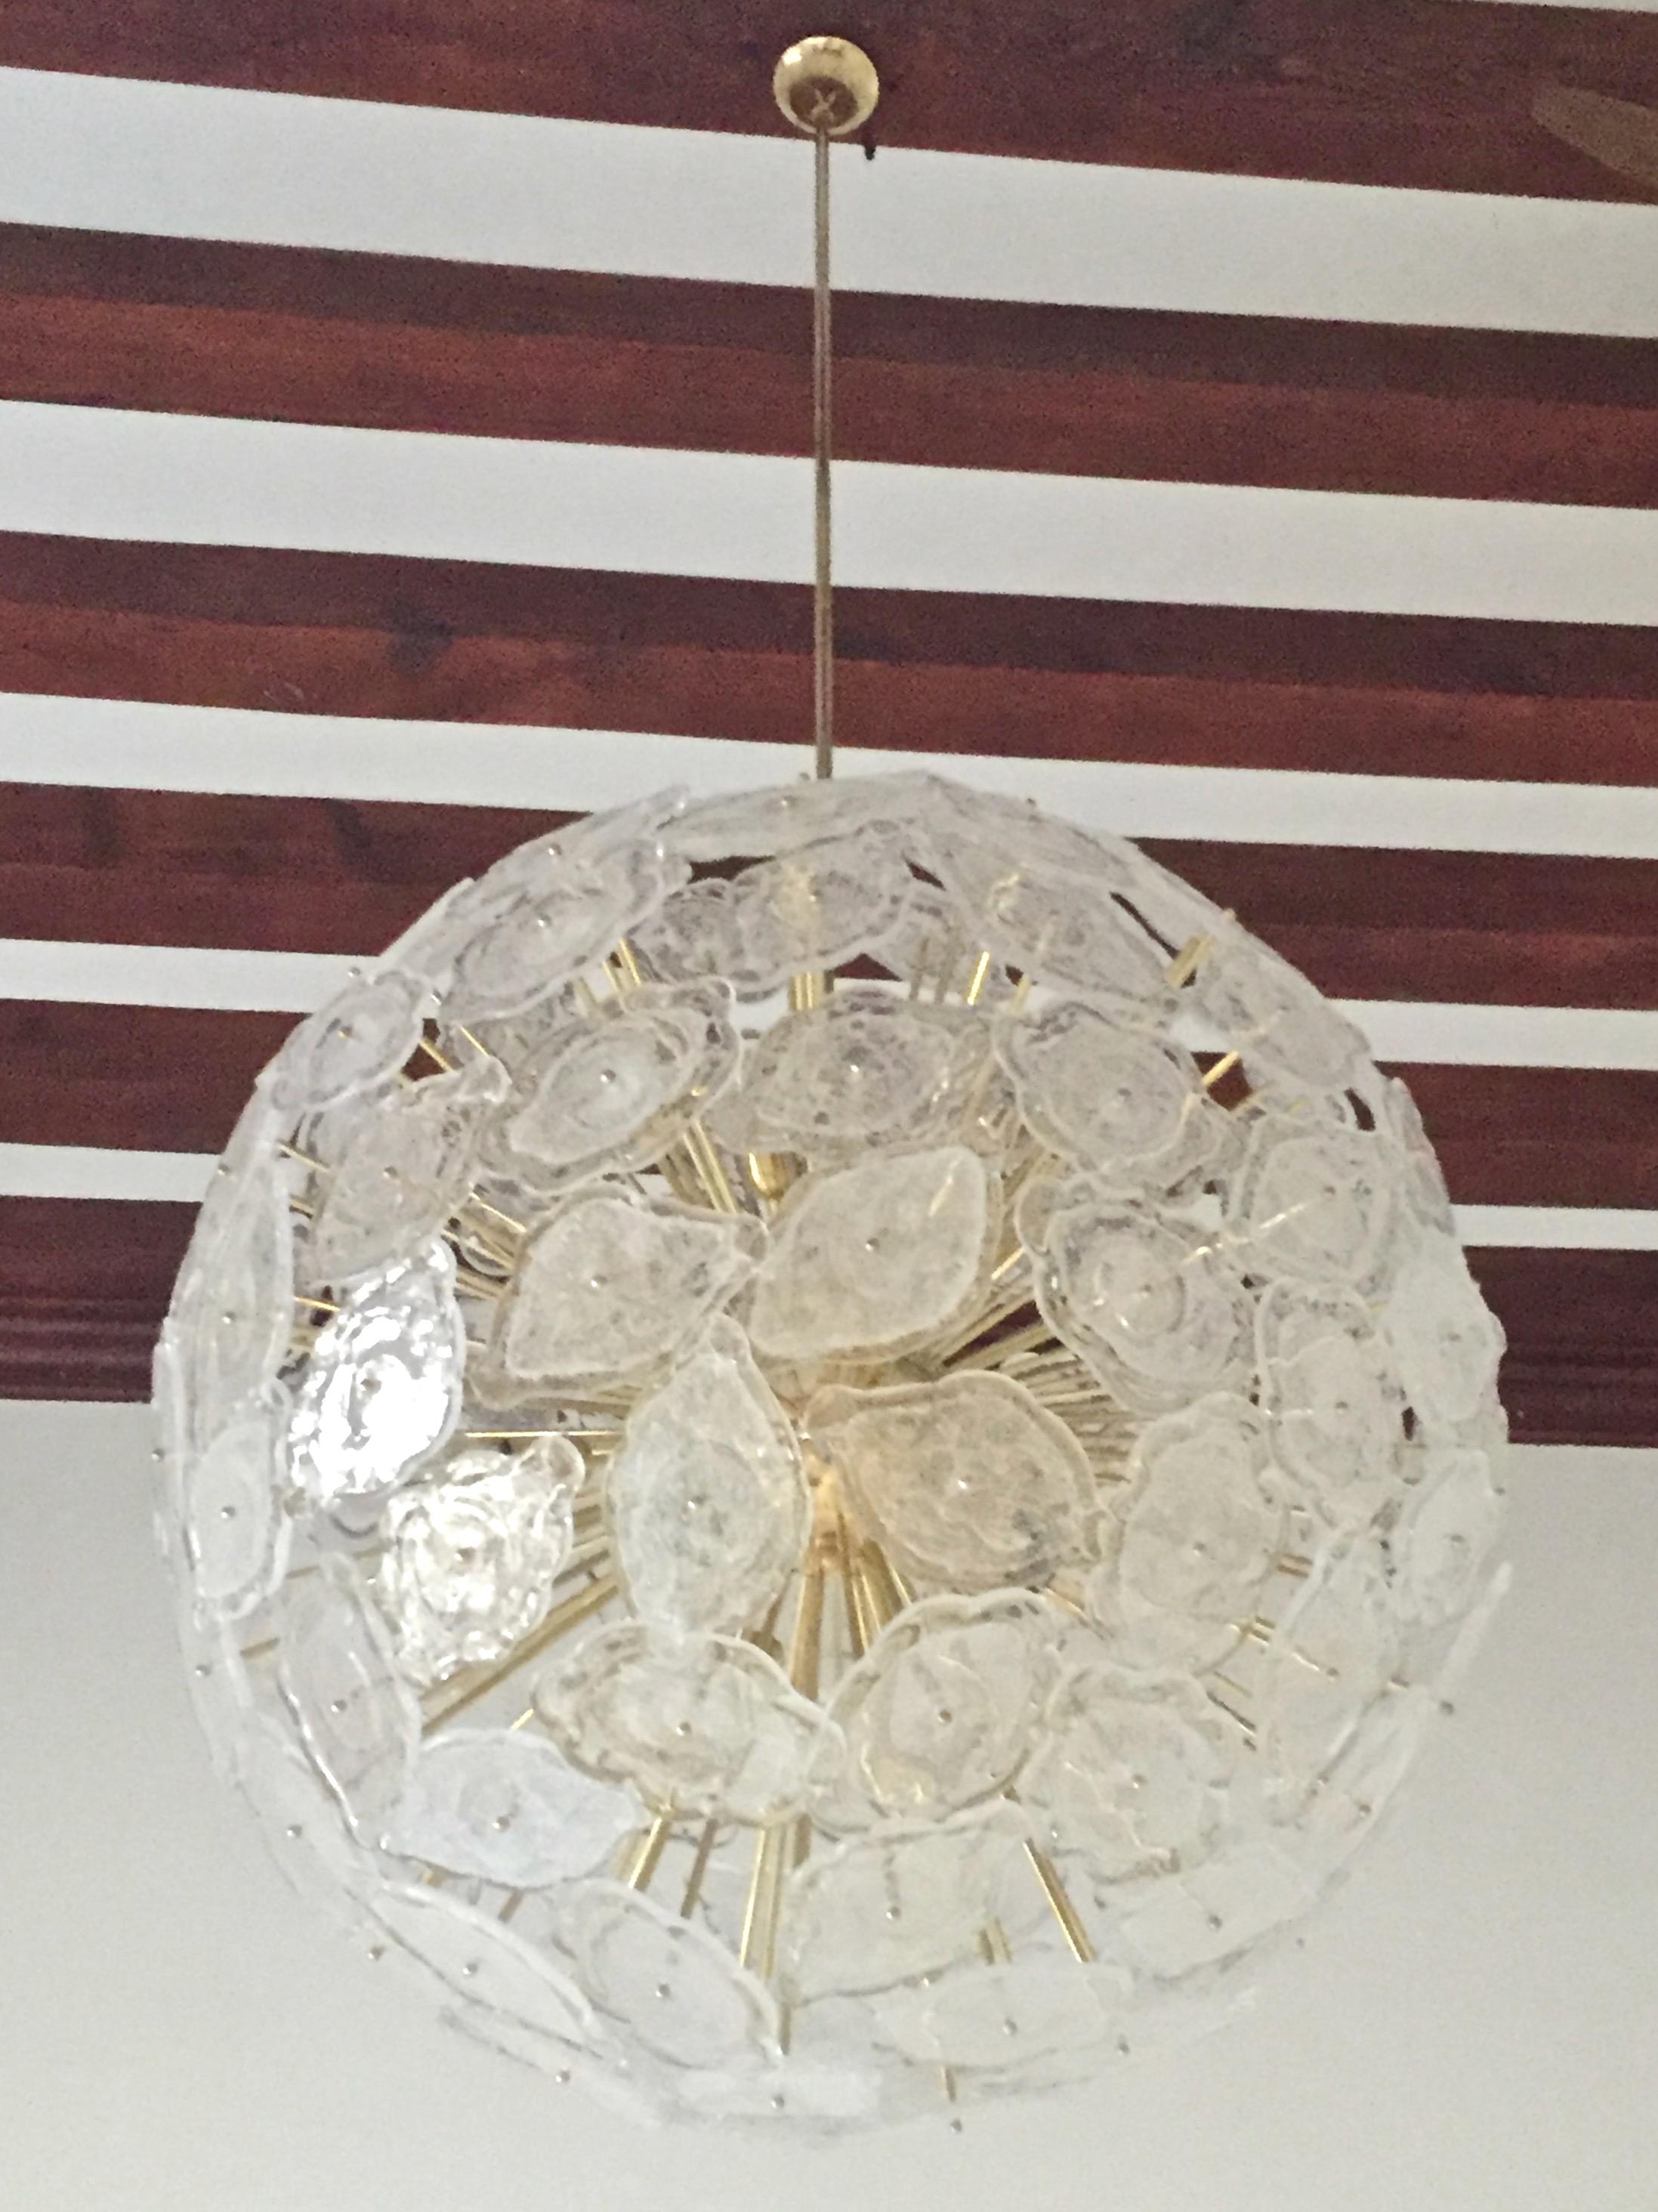 A very elegant Sputnik chandelier, a bespoke creation entirely handmade in Italy with a Mid-Century Modern flair. The round design shows exquisite details of construction and high quality of craftsmanship. Cloud shape flat leaves in blown Murano Art